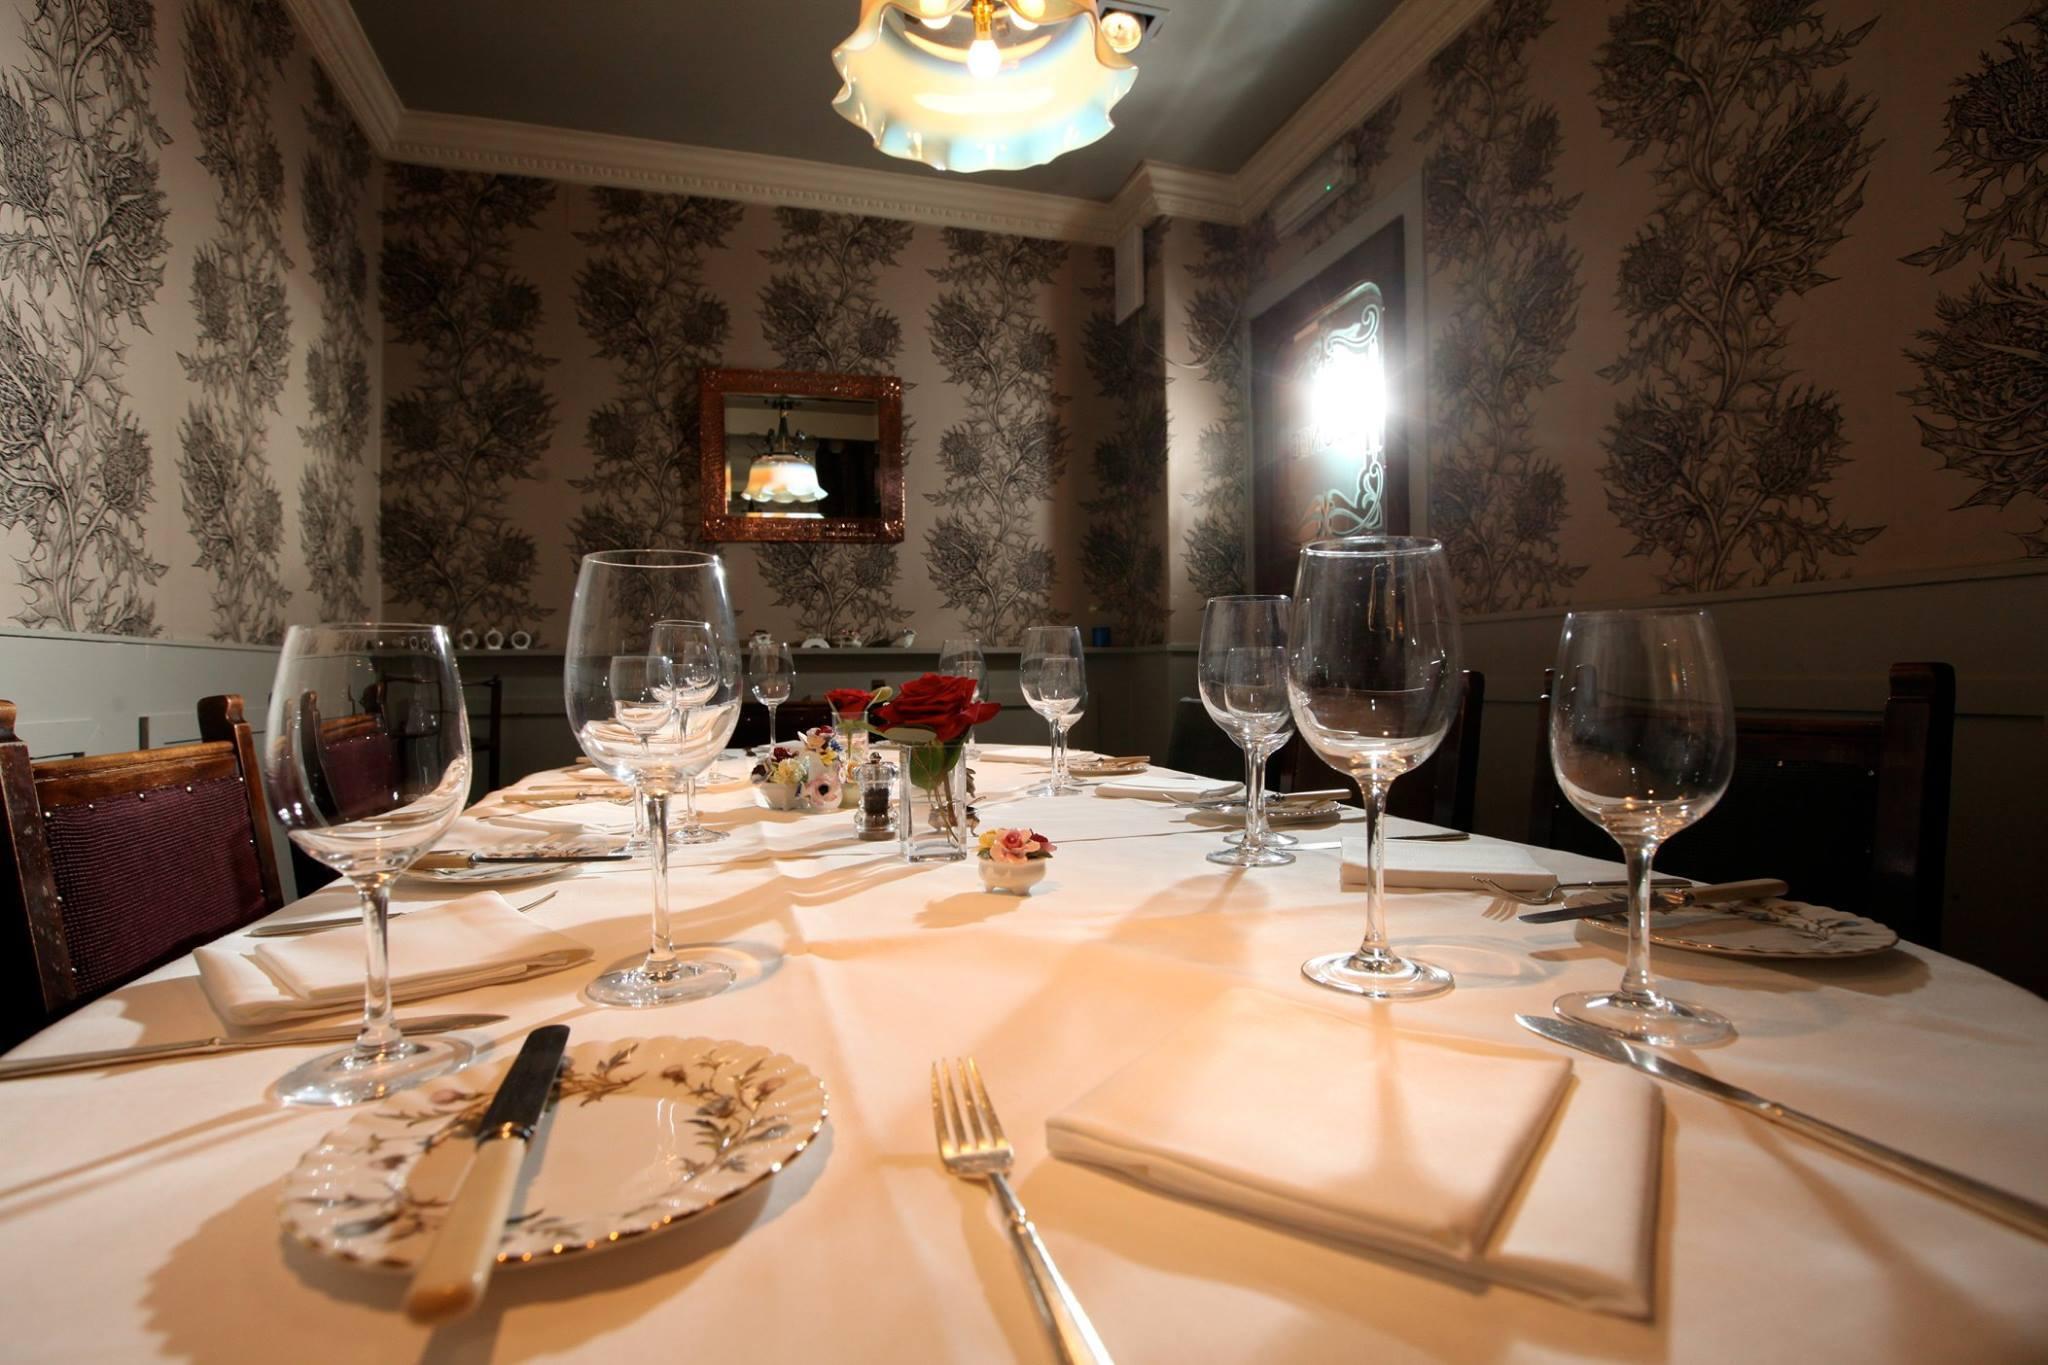 The Buttery Dining Room, The Buttery photo #1